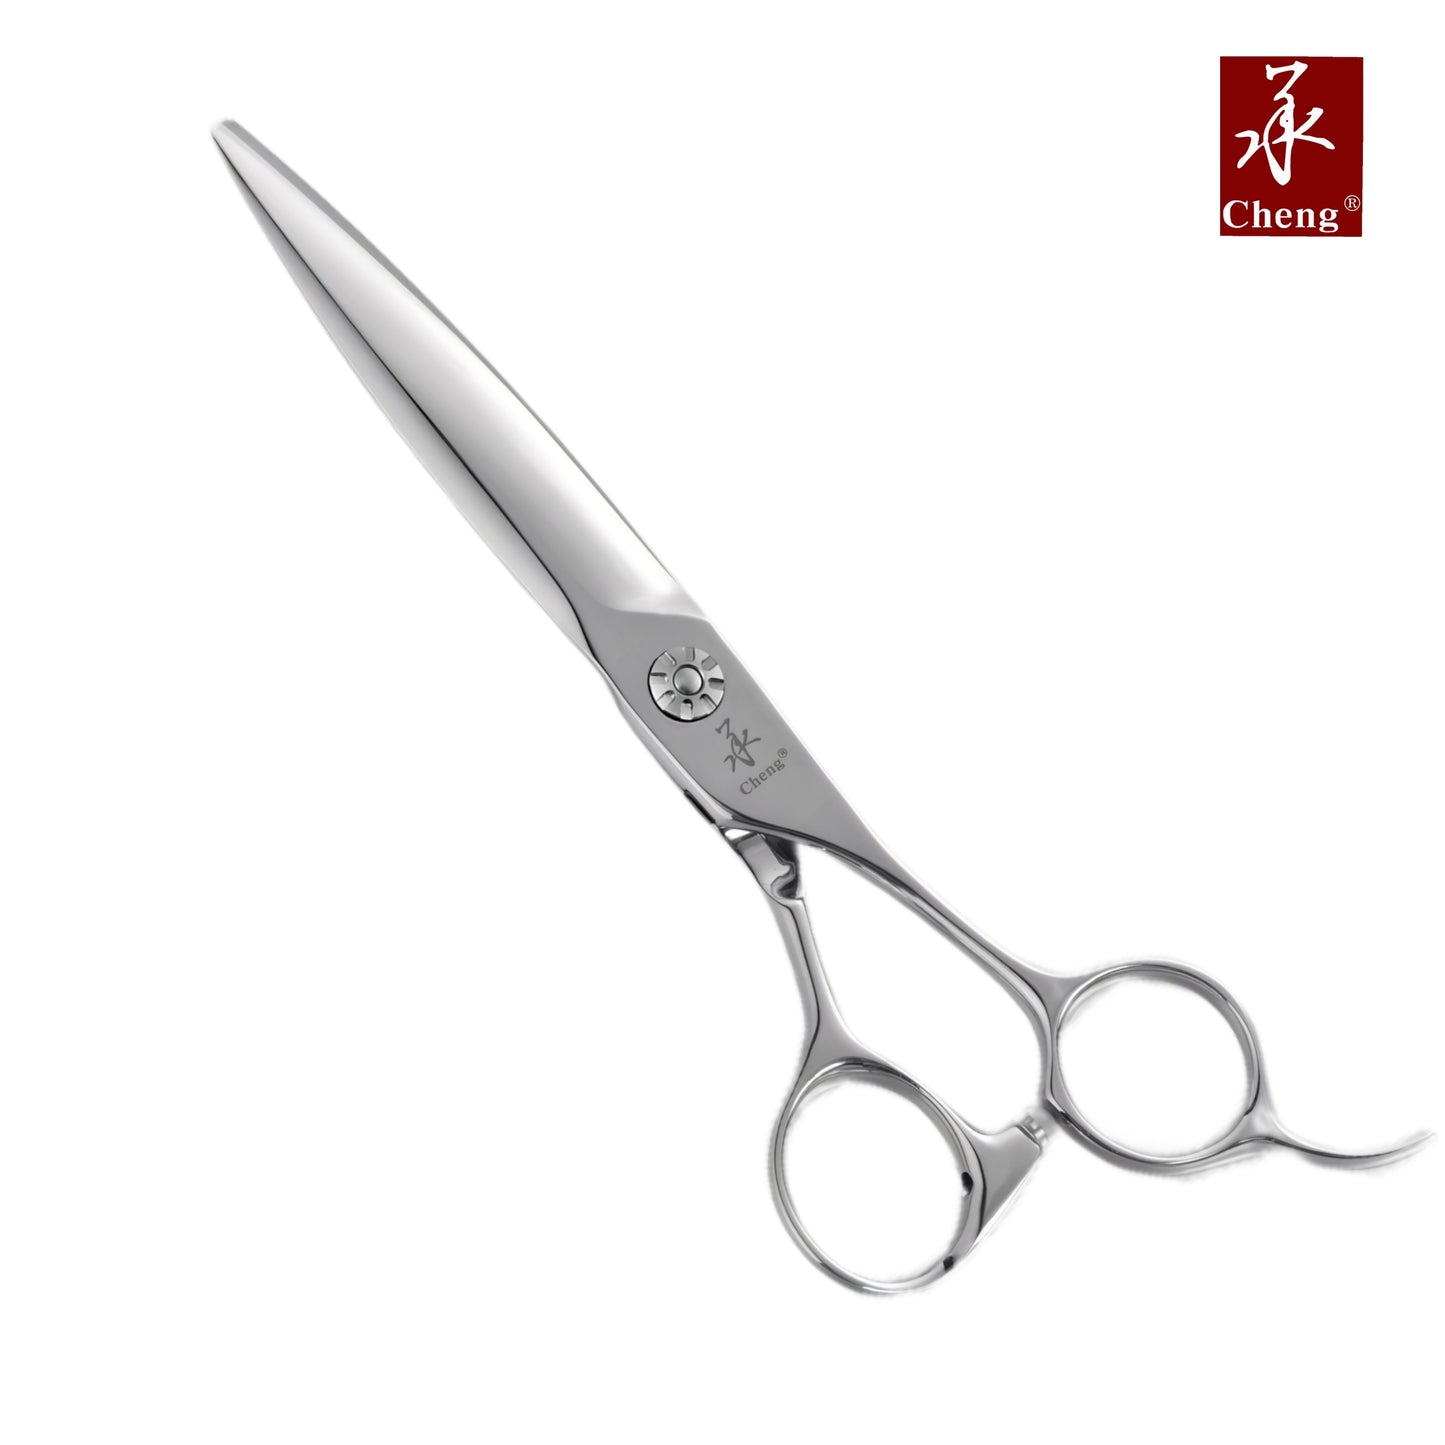 BF-614TZA  Hair Thinning Cutting Scissors 6.0 Inch 14T Left Hand About=45%